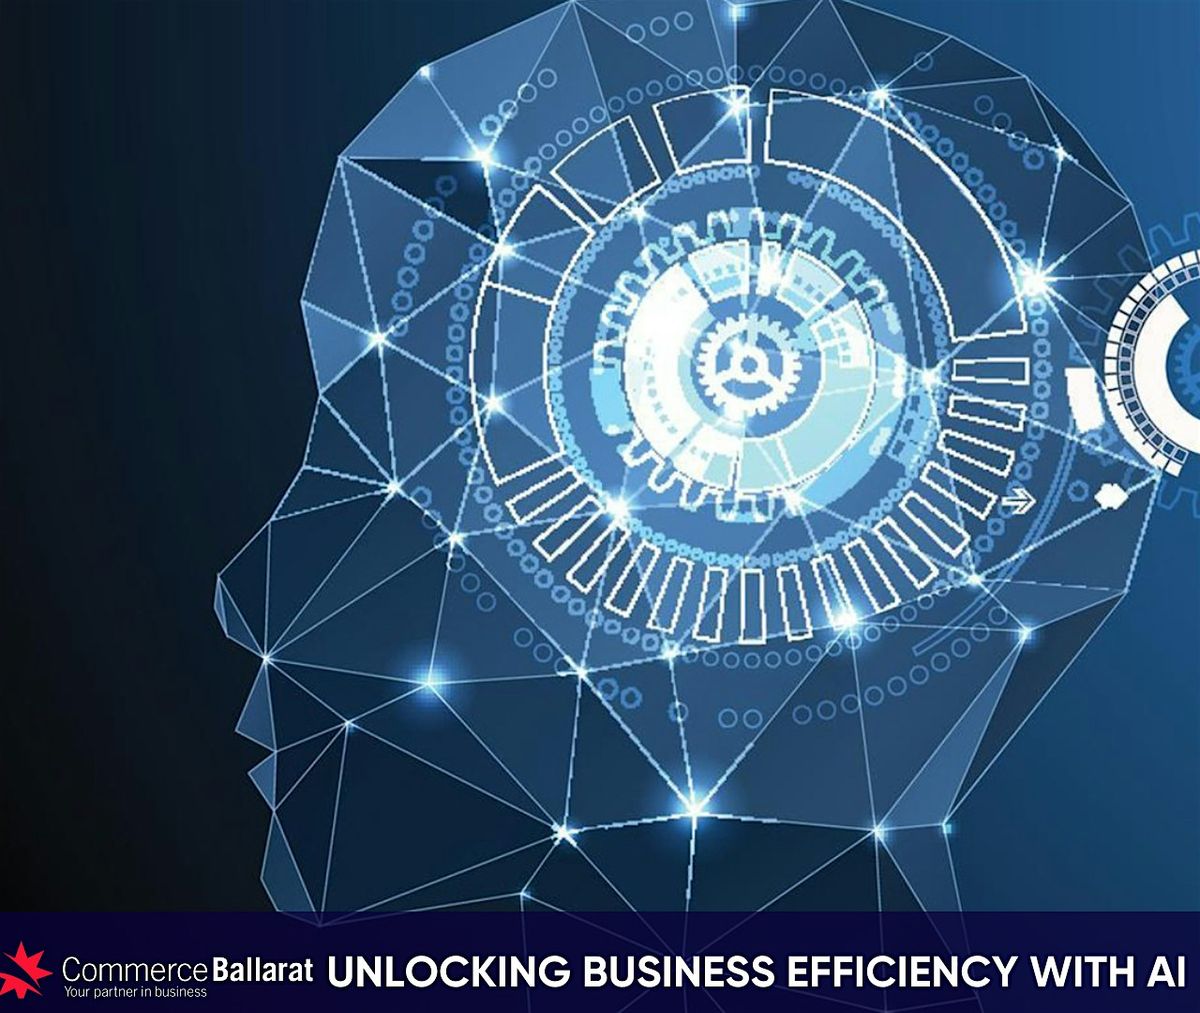 UNLOCKING BUSINESS EFFICIENCY WITH AI